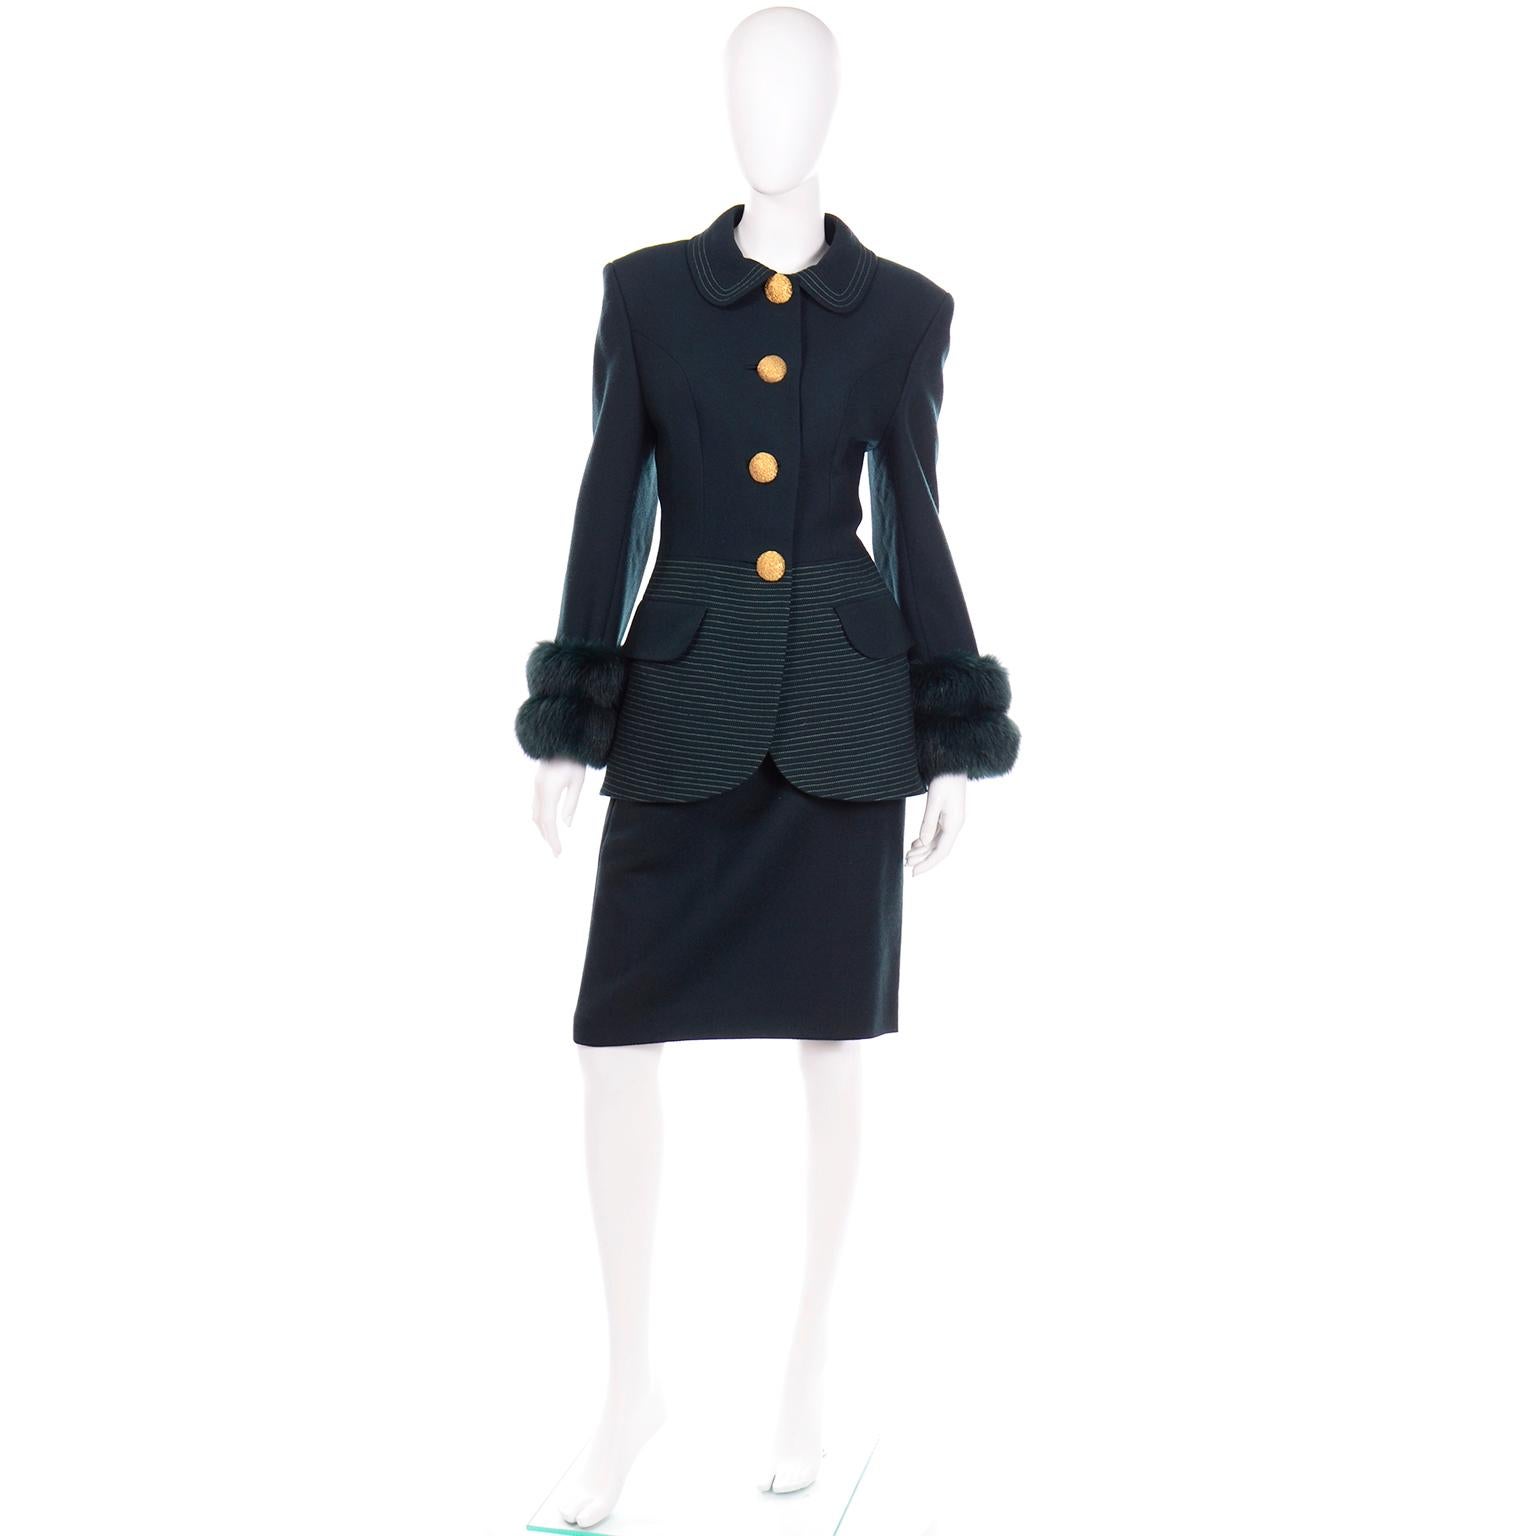 This is an outstanding vintage green worsted green wool skirt suit with amazing fur cuffs on the jacket. This suit was designed by the British designer Tomasz Starzewski in the 1990's. Starzewski has dressed many royals, including Princess Diana and